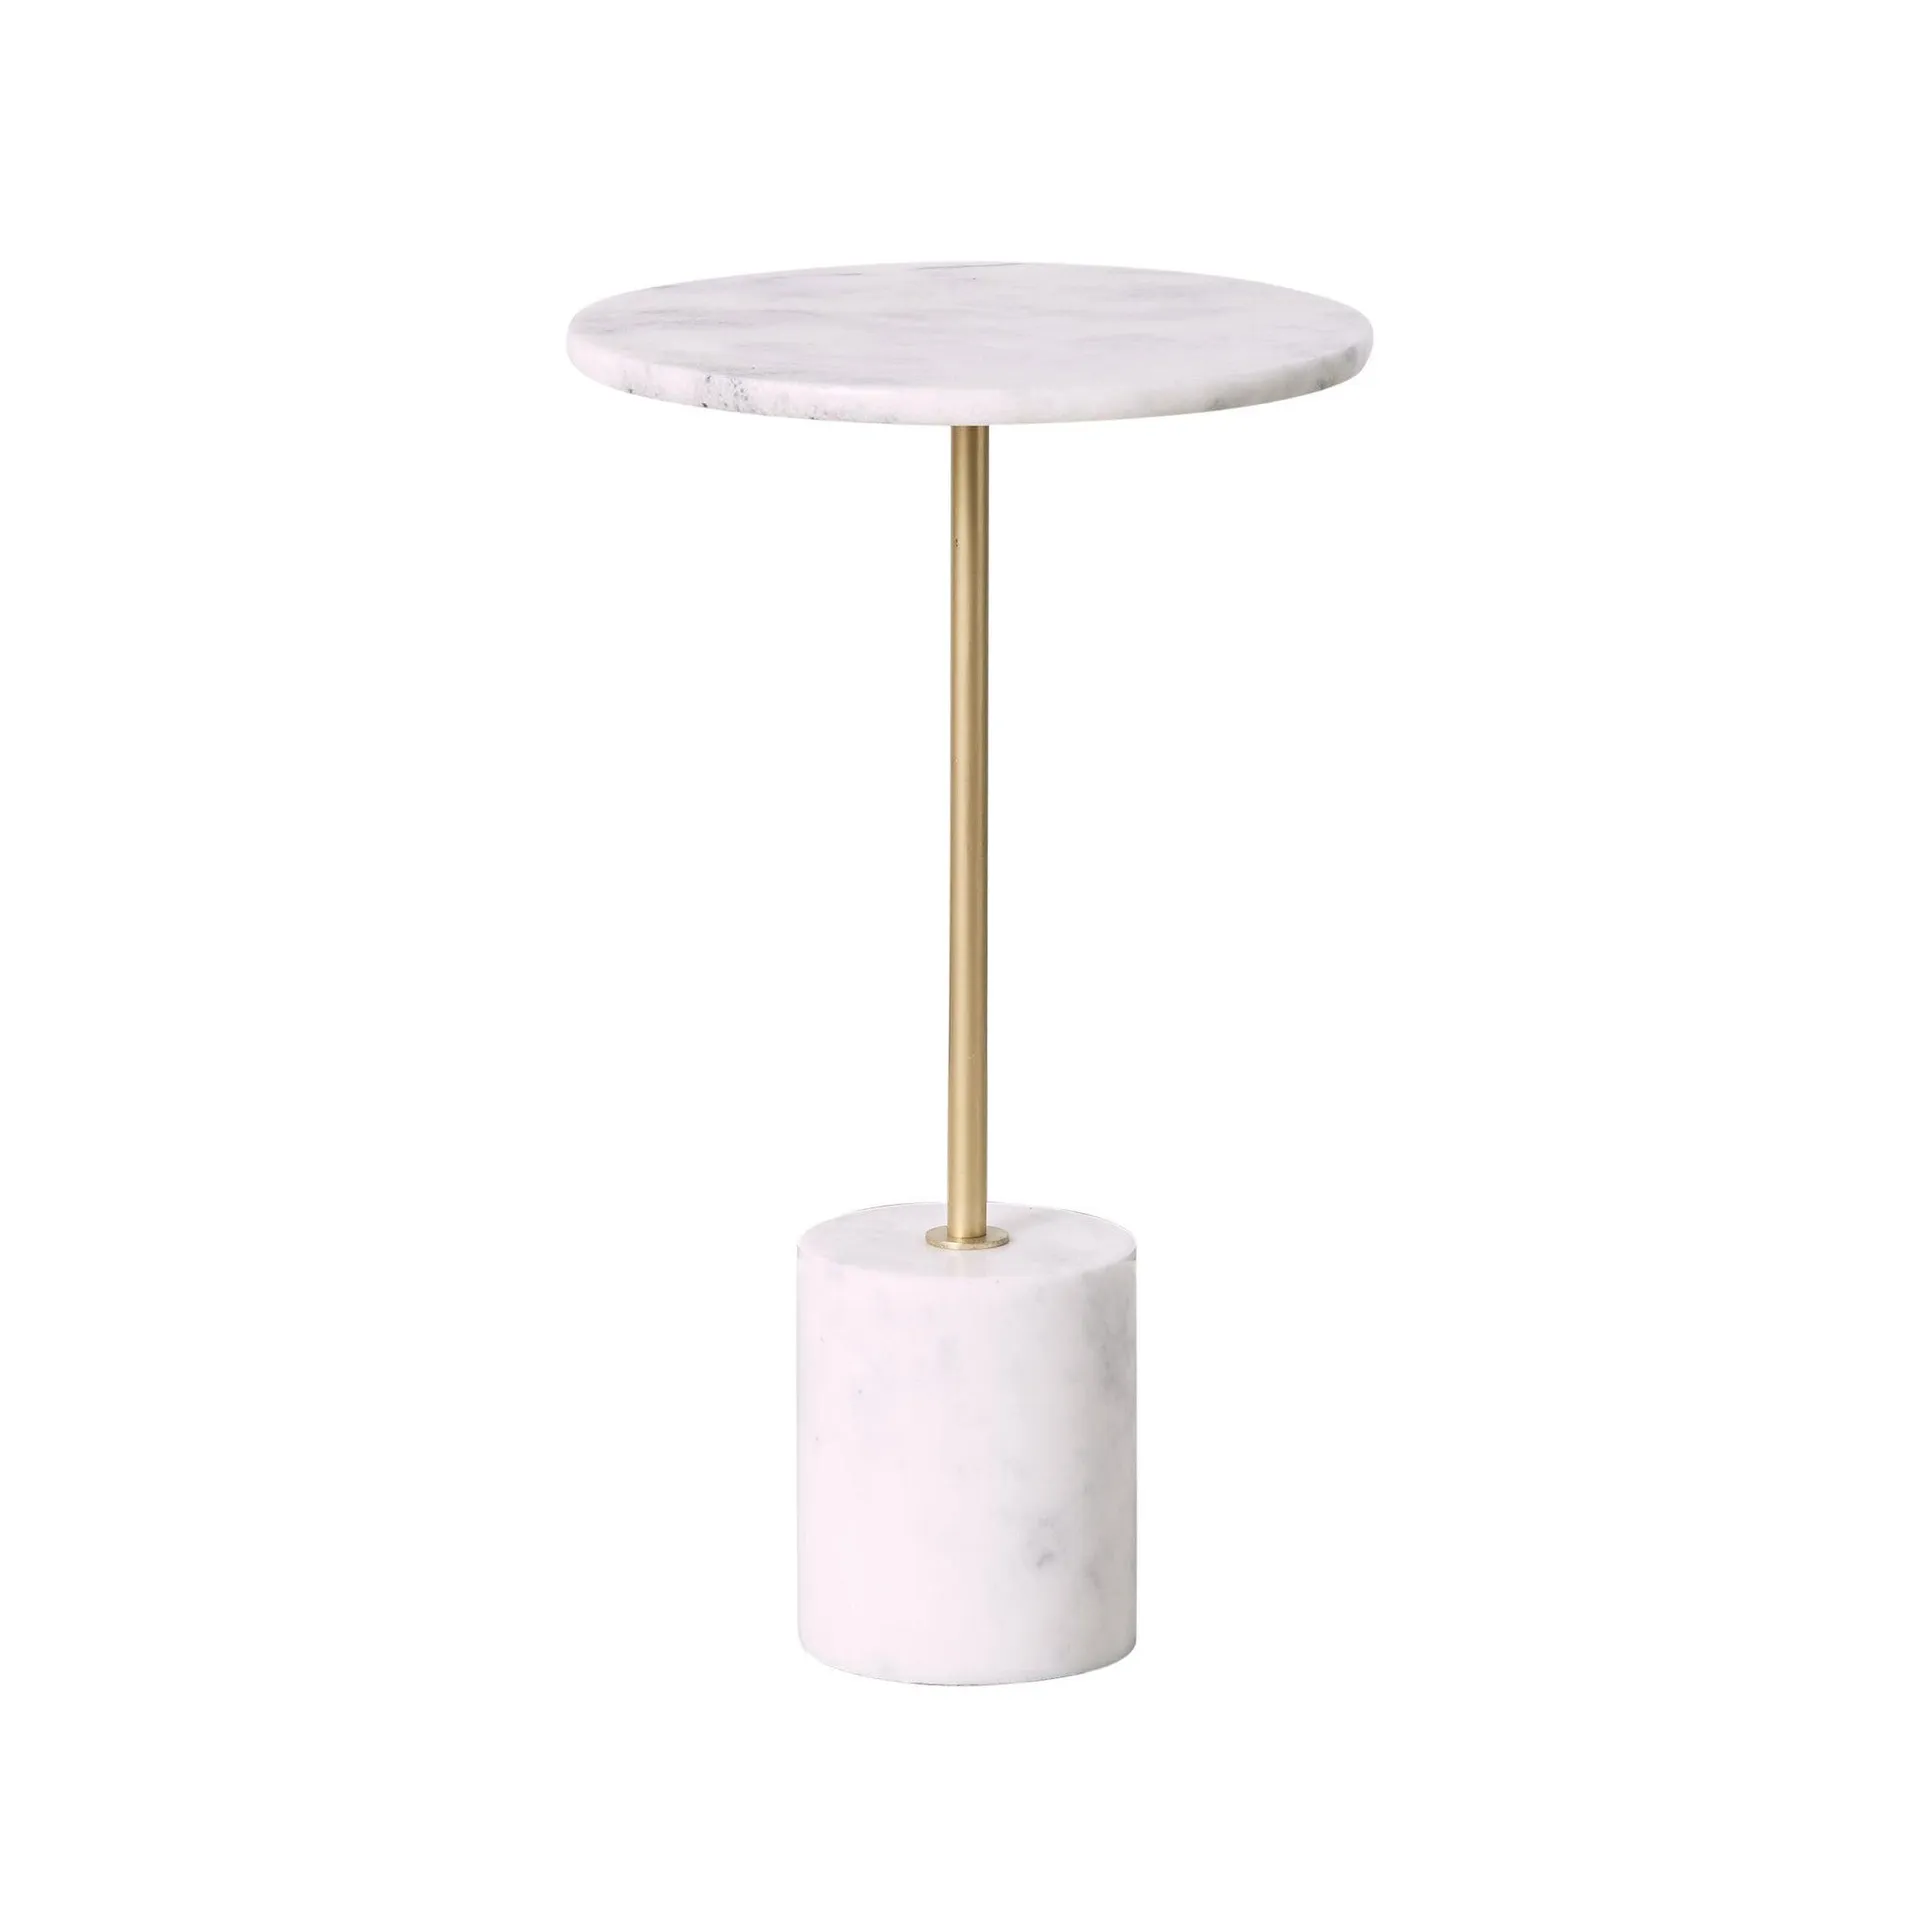 Layla White Marble Round Side Table Large 35.5x61.5cm